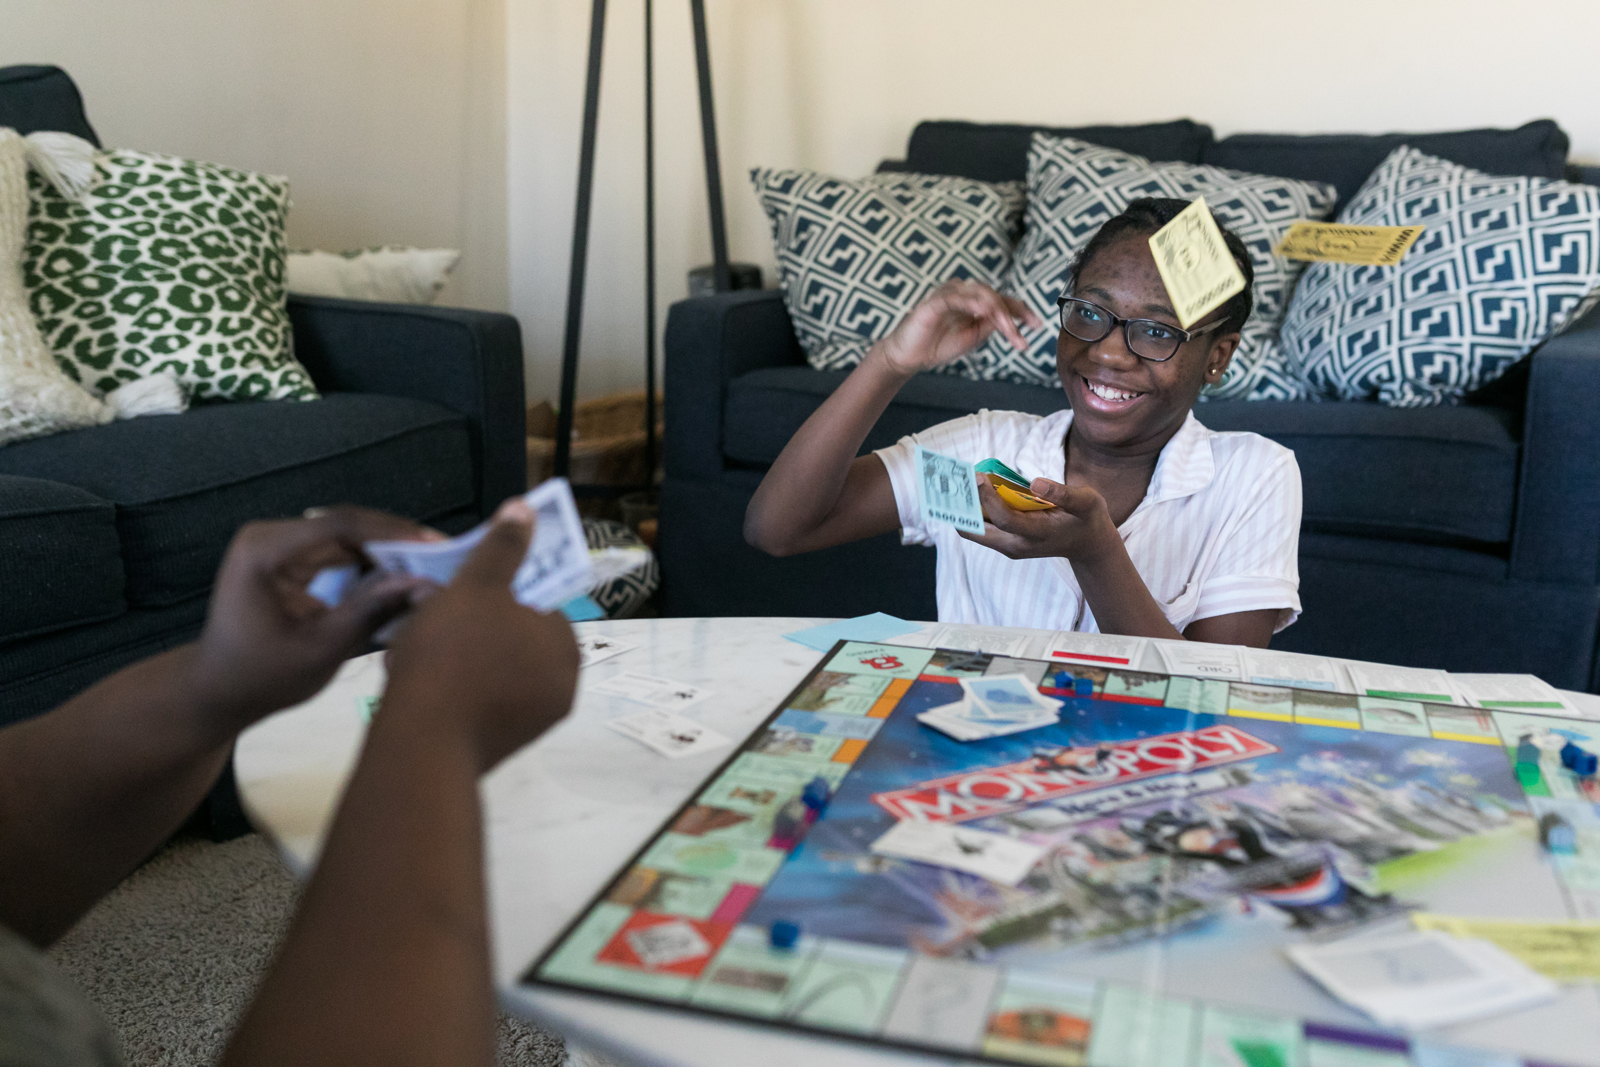 How monopoly teaches kids about money